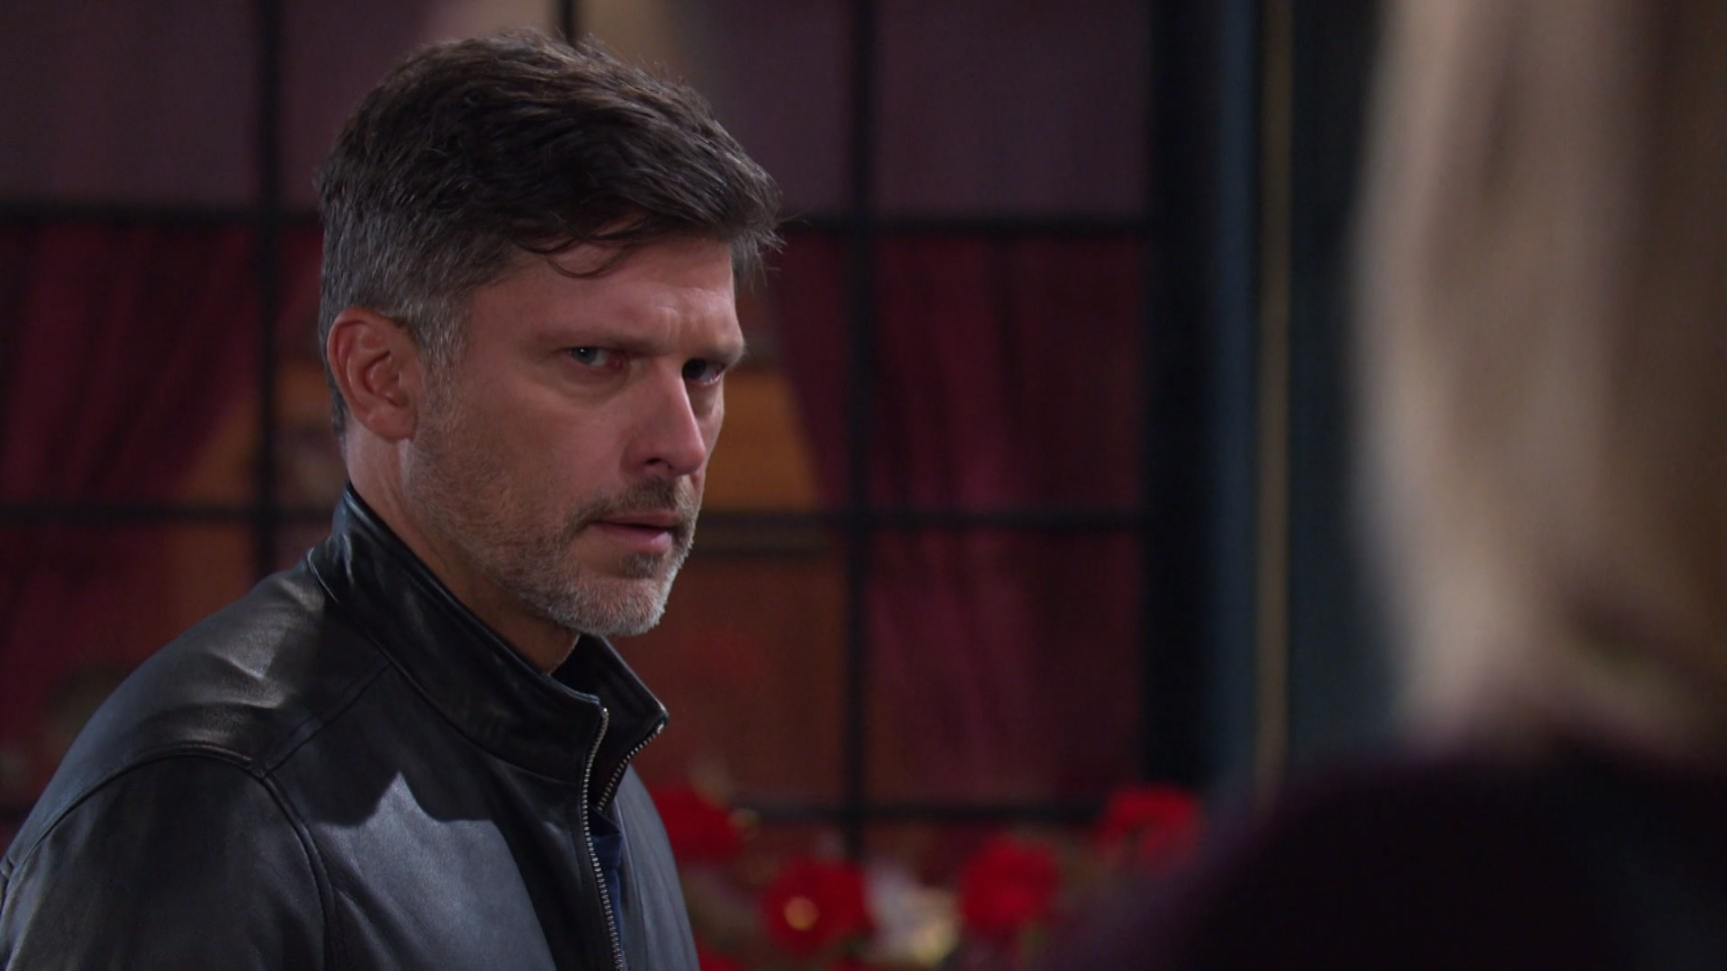 eric sees nicole and glares at horton square days of our lives recap soapsspoilers